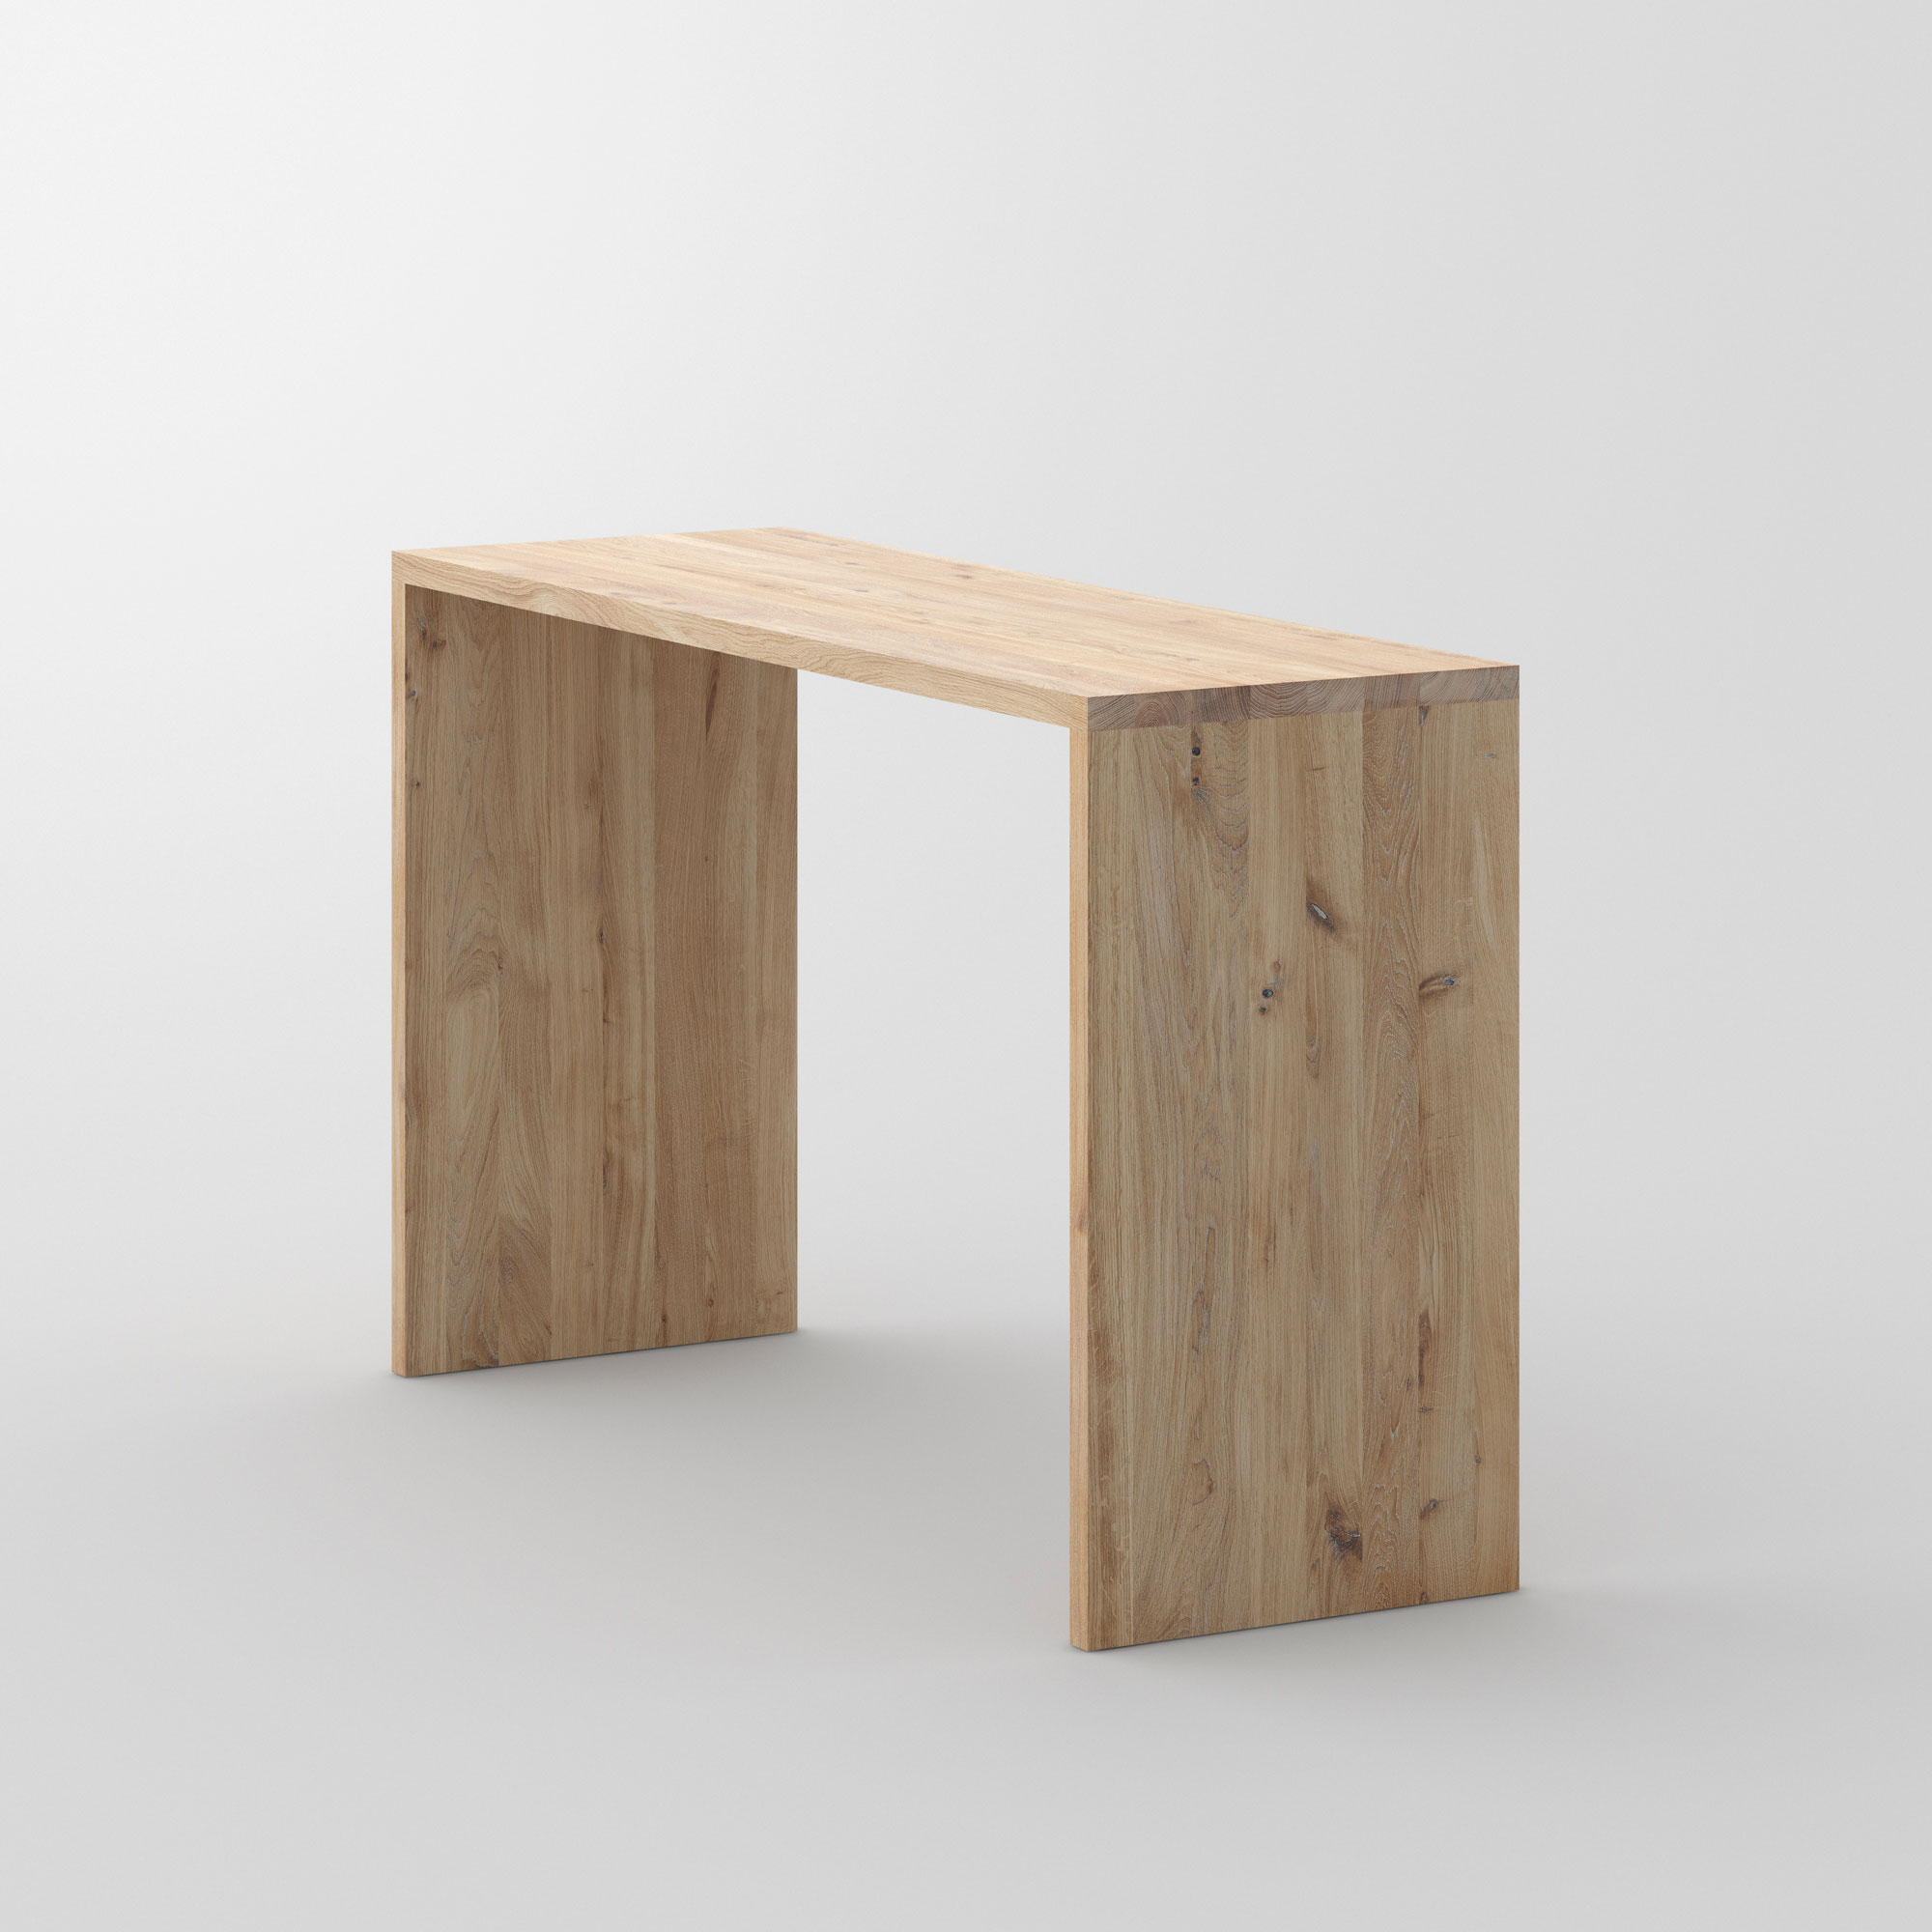 Solid Wood Console Table MENA CONSOLE cam3 custom made in solid wood by vitamin design